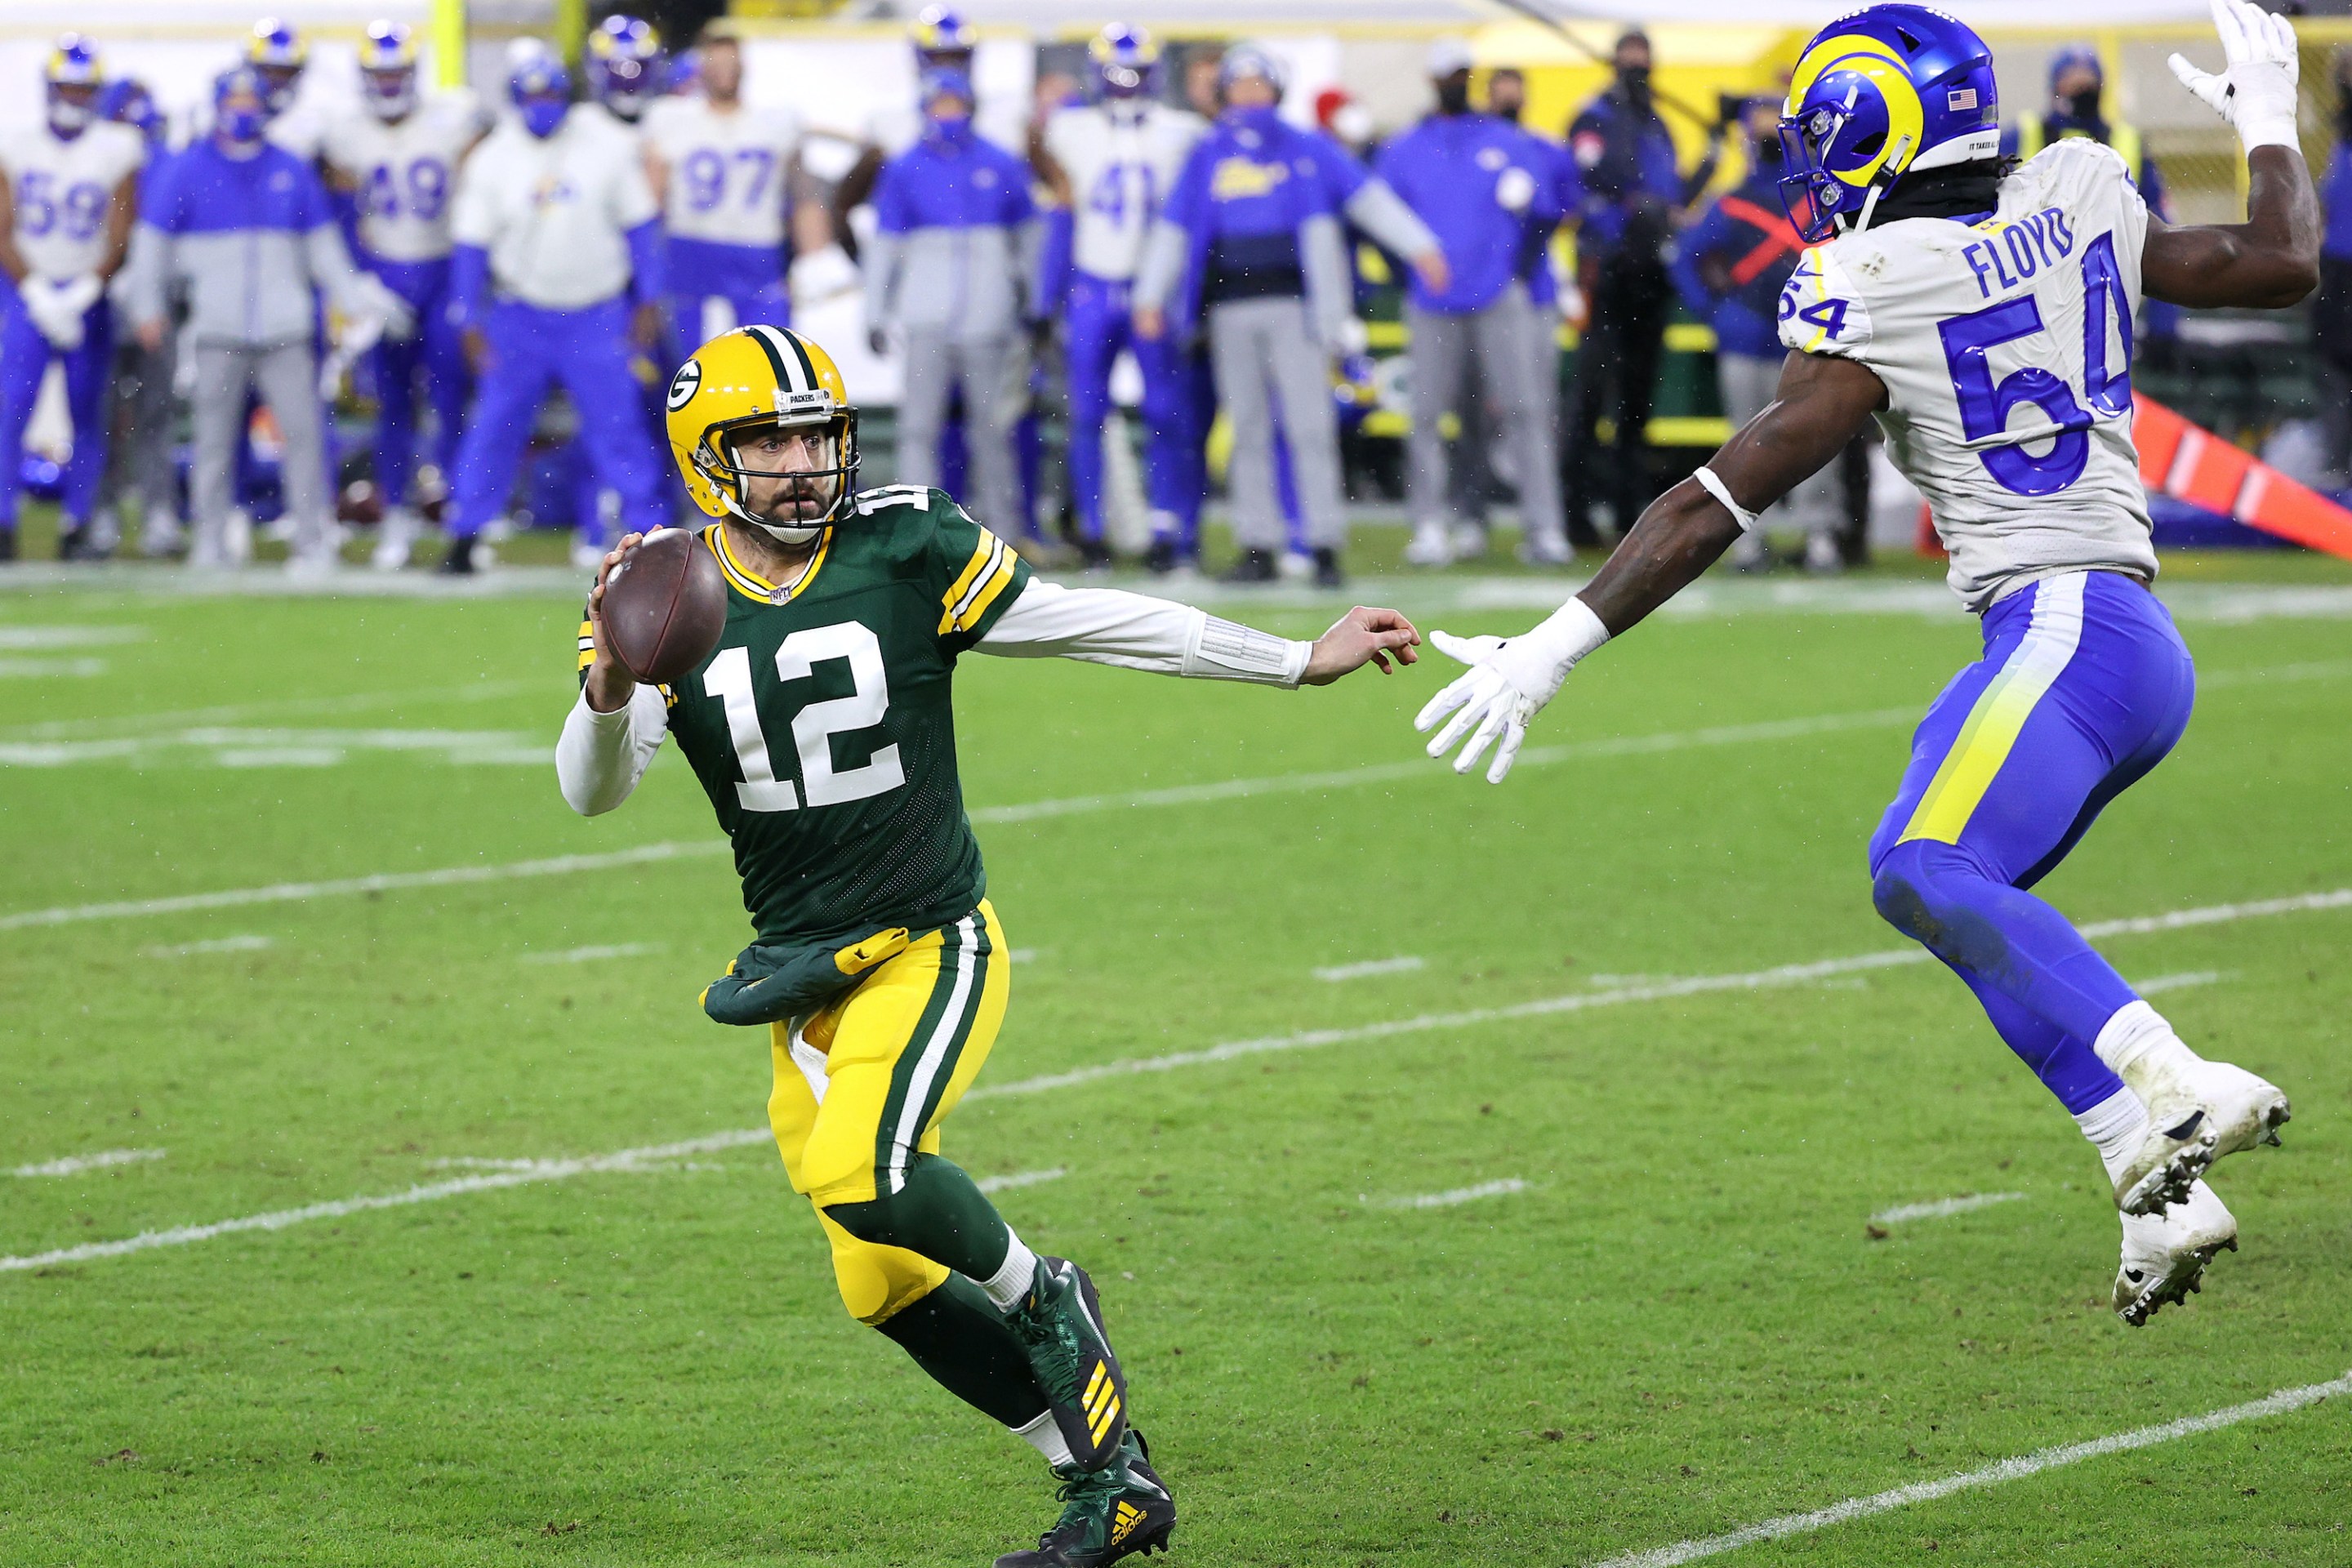 Aaron Rodgers #12 of the Green Bay Packers runs against Leonard Floyd #54 of the Los Angeles Rams for a 1-yard touchdown in the second quarter during the NFC Divisional Playoff game at Lambeau Field on January 16, 2021 in Green Bay, Wisconsin.